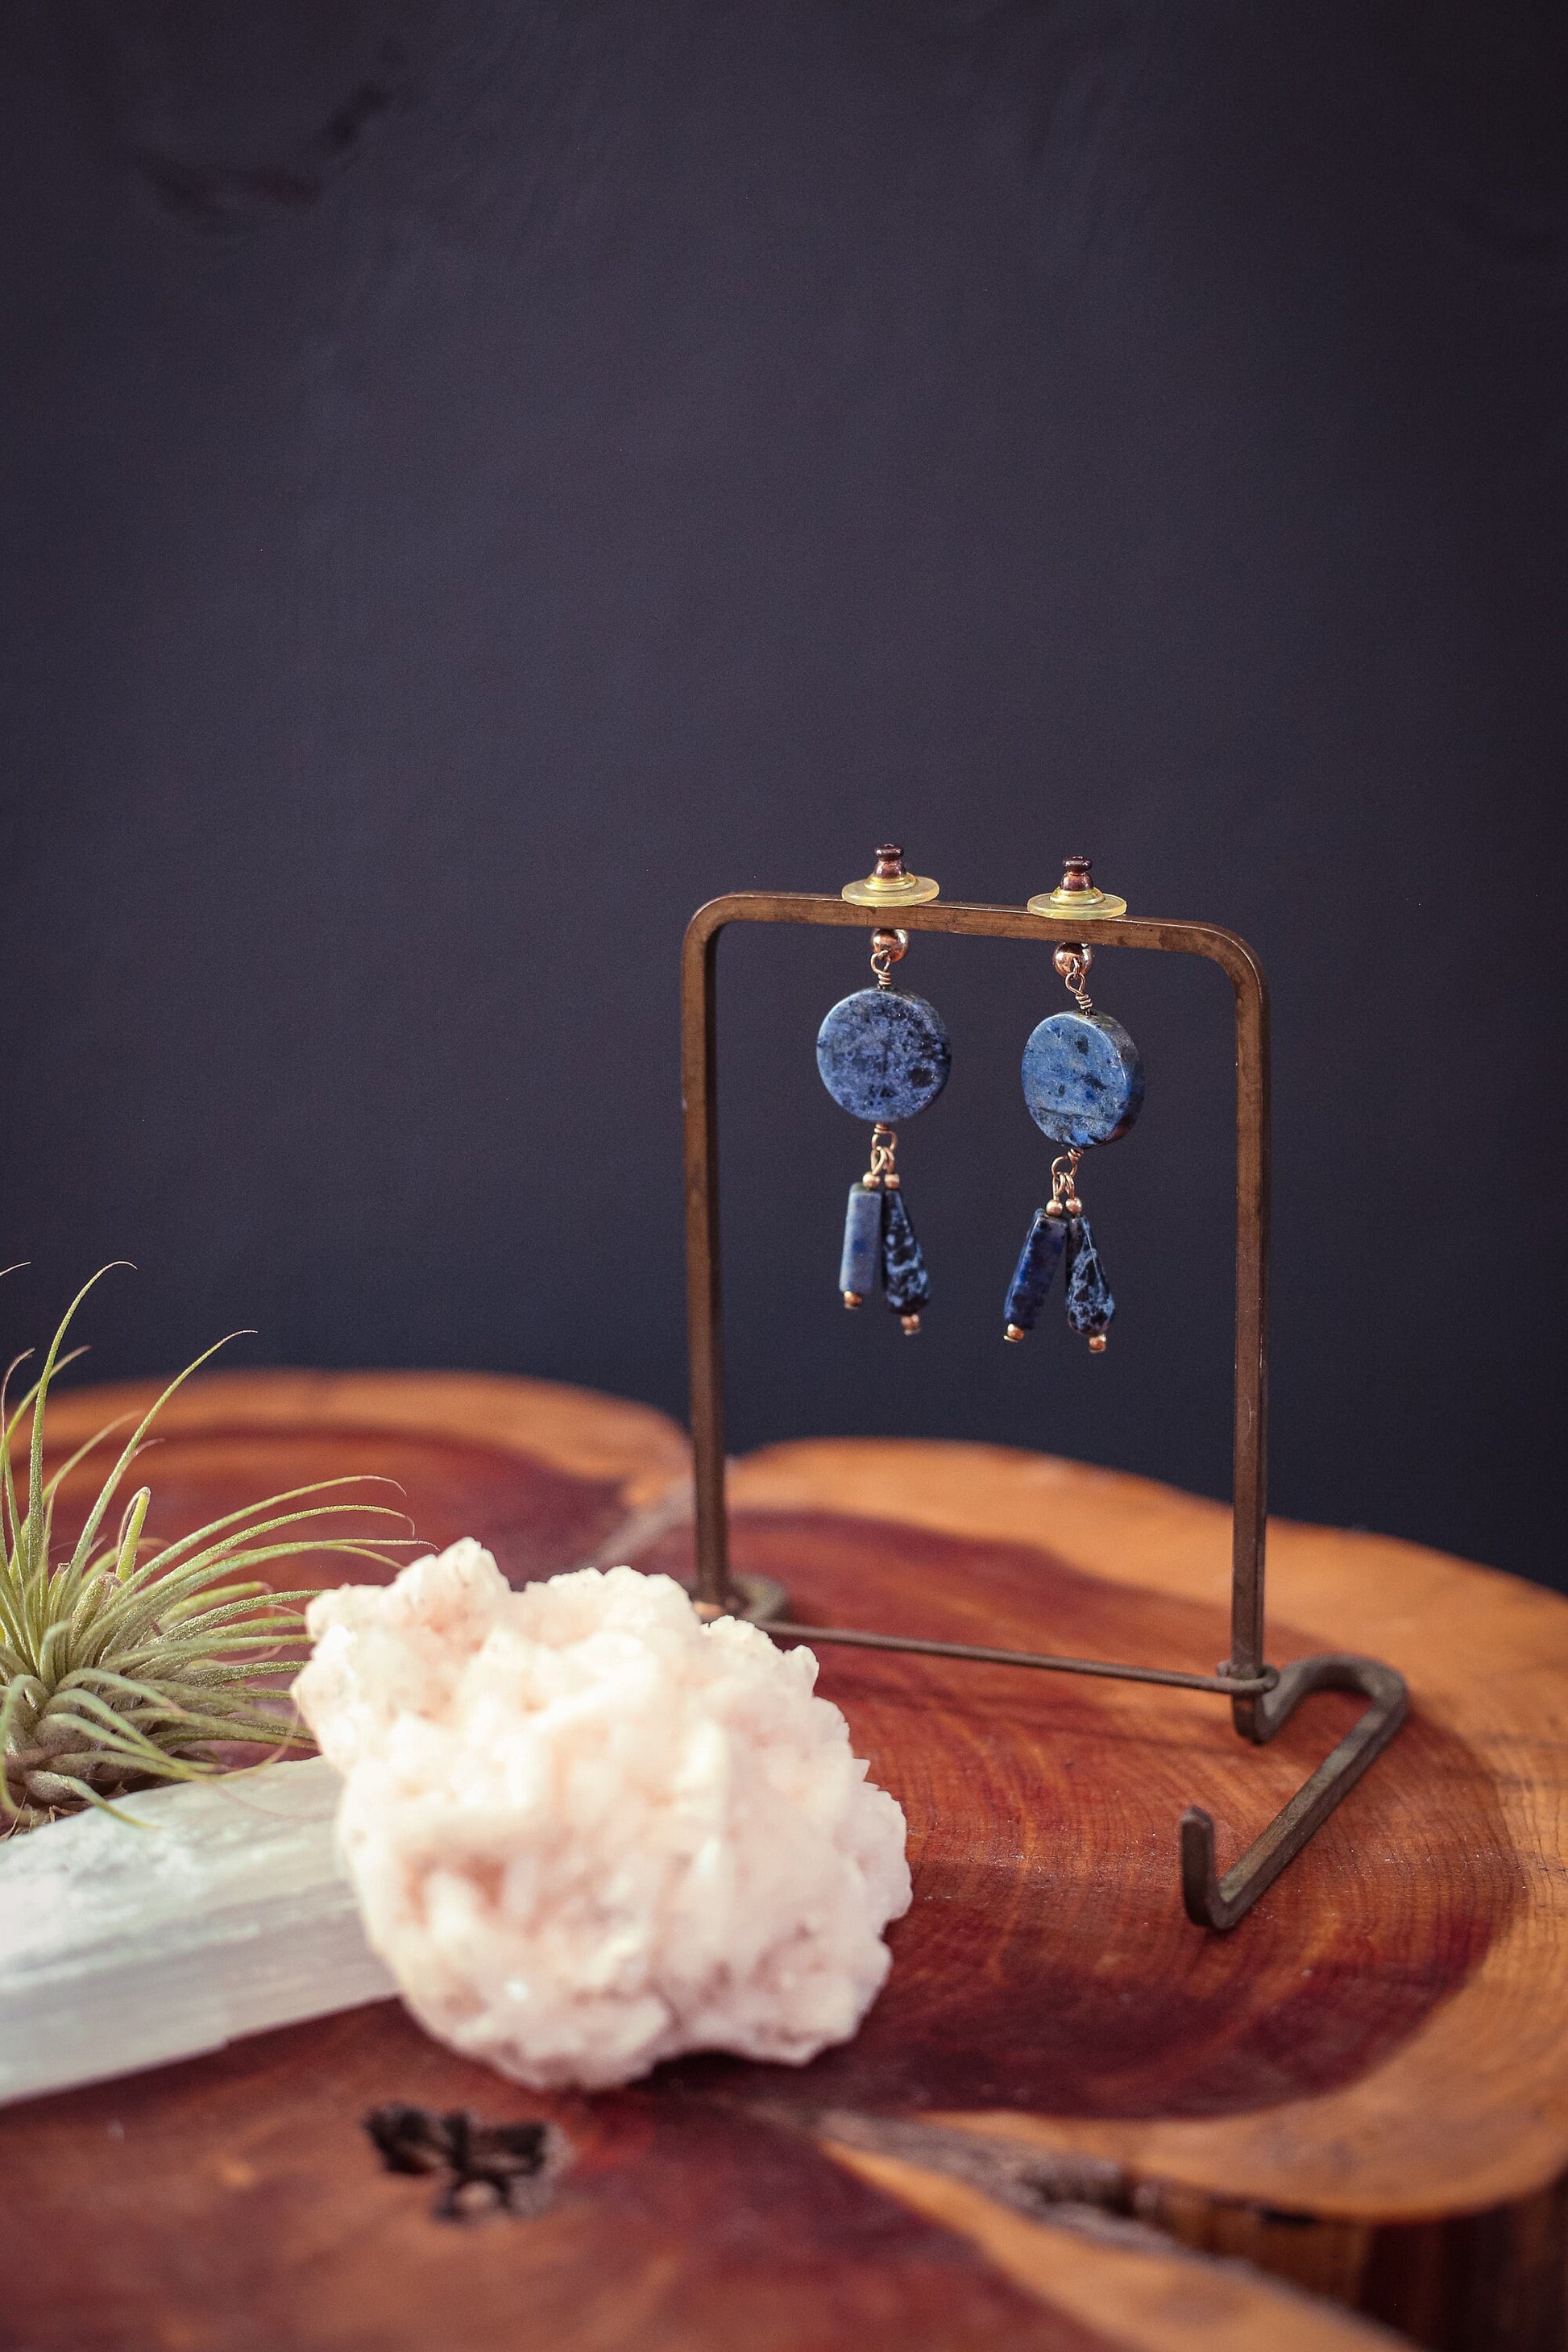 Lapis & Gold Wired Earrings with Gold Ball Post - Vintage Blue Lapis Lazuli Earrings